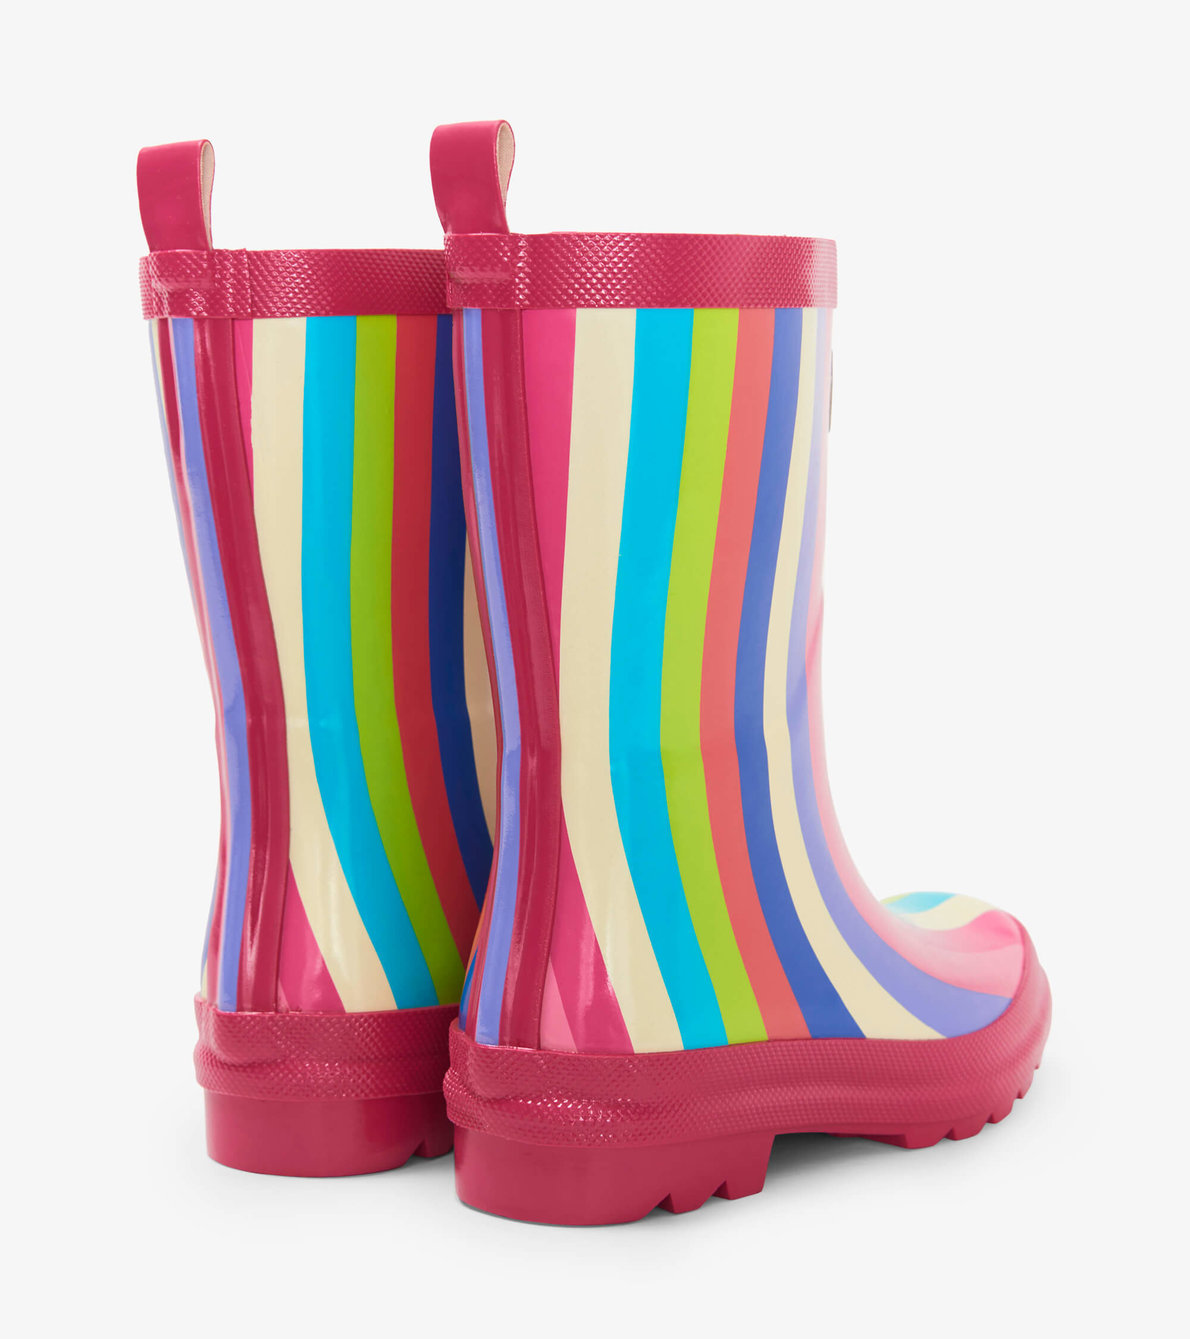 View larger image of Rainbow Stripes Shiny Kids Wellies